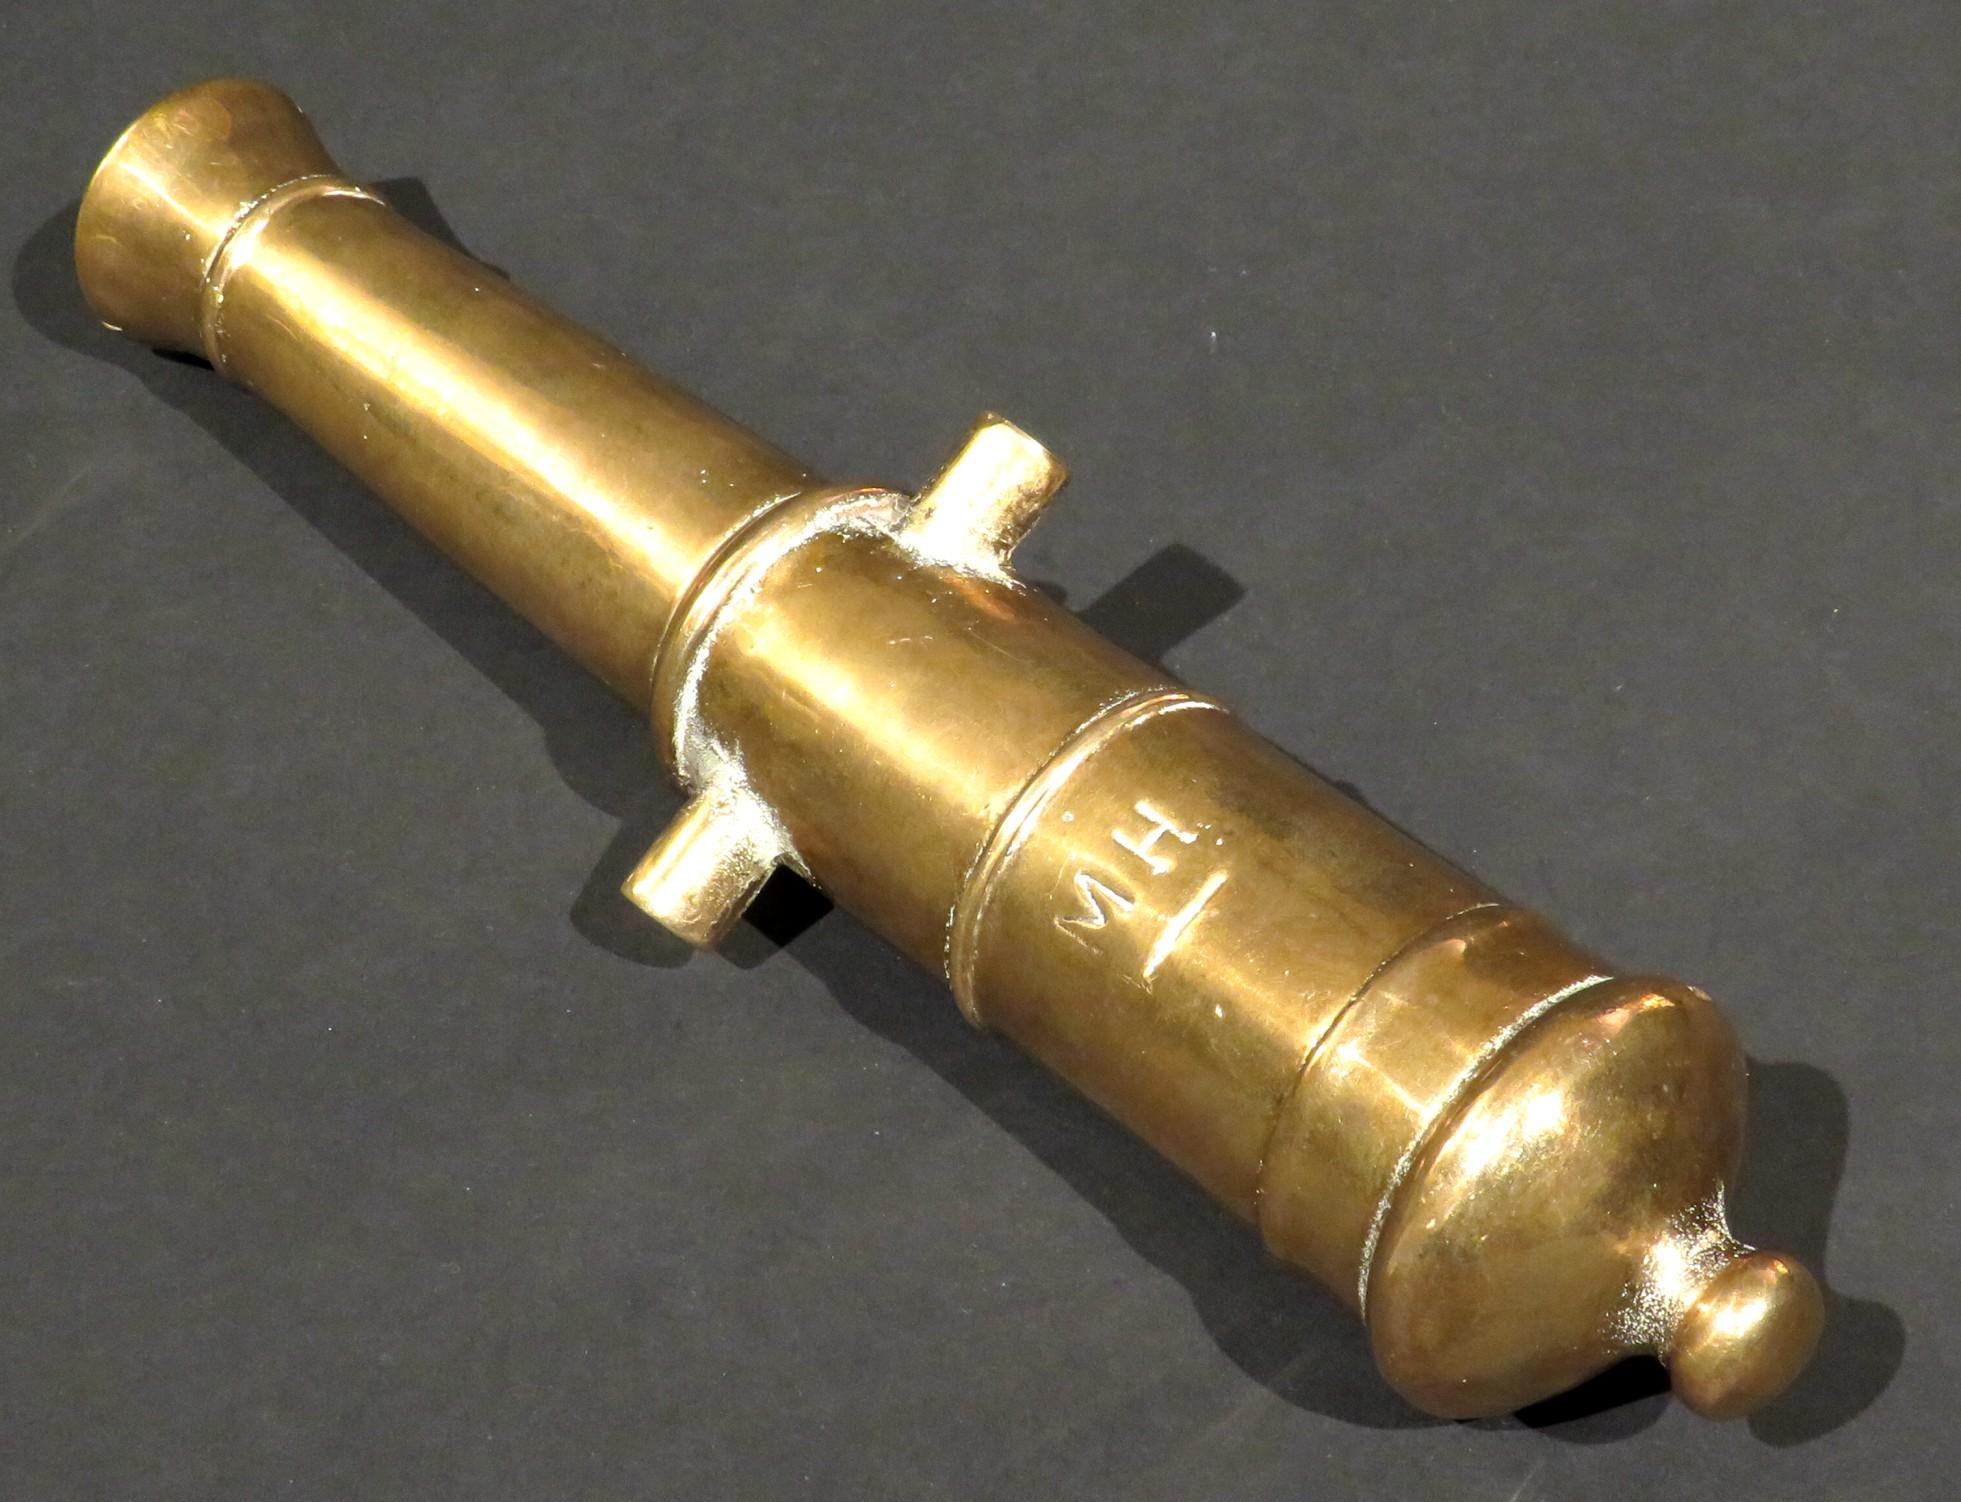 Bronze A Fine Model of a 19th C. British 24-Pounder Muzzle-Loading Smoothbore Cannon For Sale